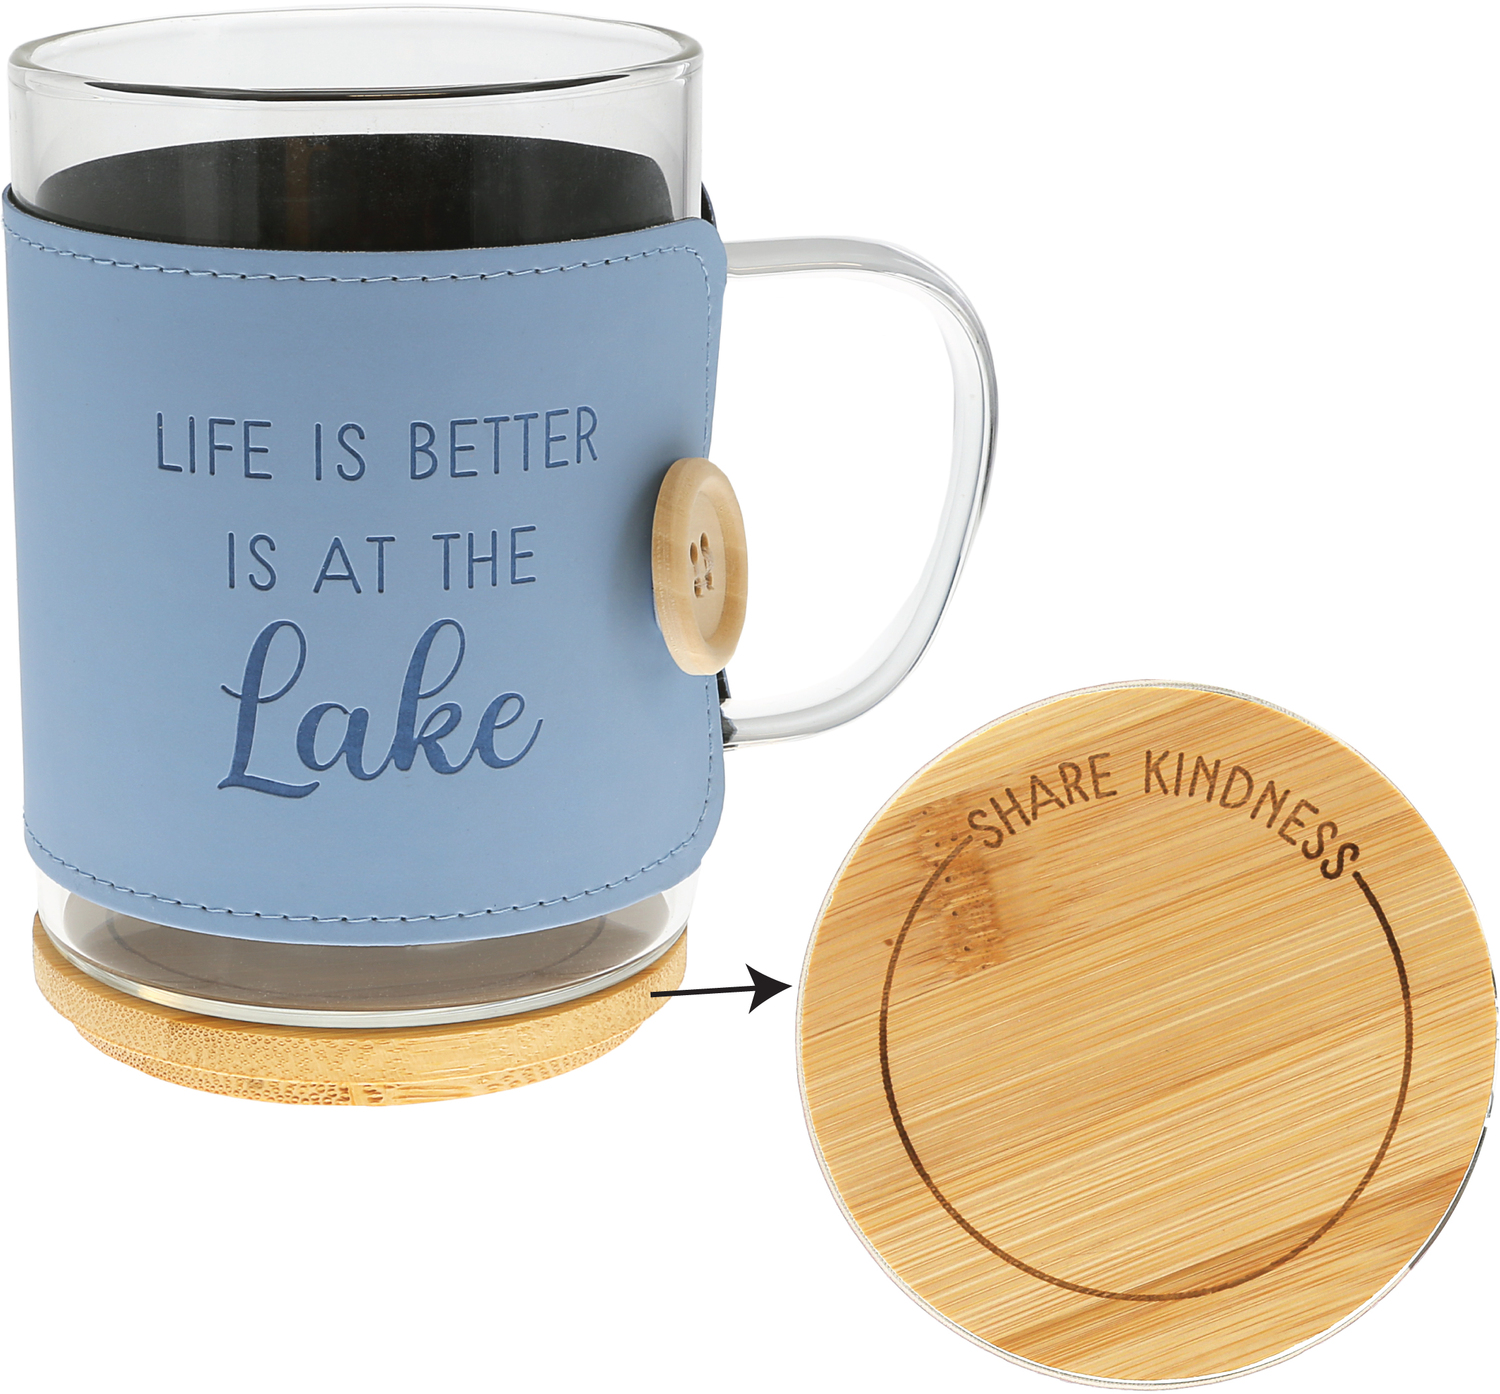 Lake by Wrapped in Kindness - Lake - 16 oz Wrapped Glass Mug with Coaster Lid